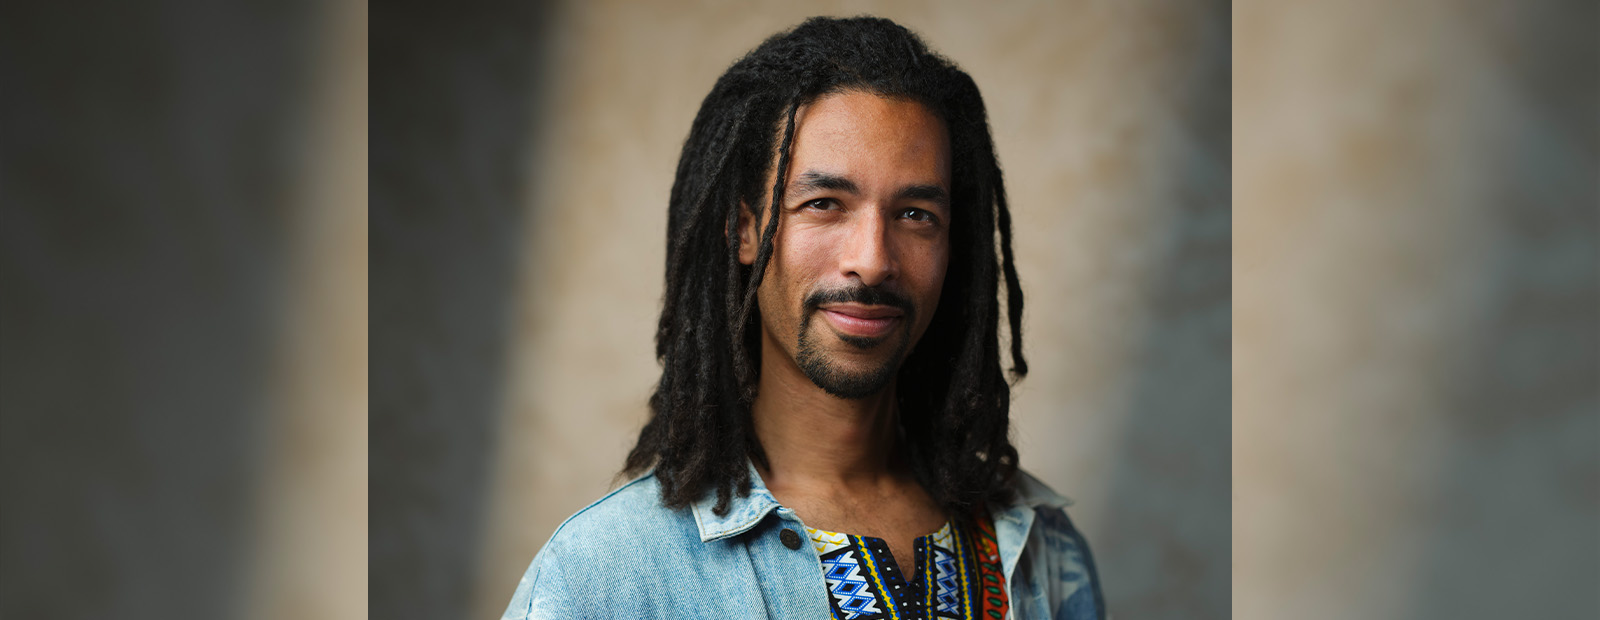 A headshot of AJA Louden, who has black dreadlocks and wears a colourful shirt beneath a denim jacket, standing in front of a grey backdrop.